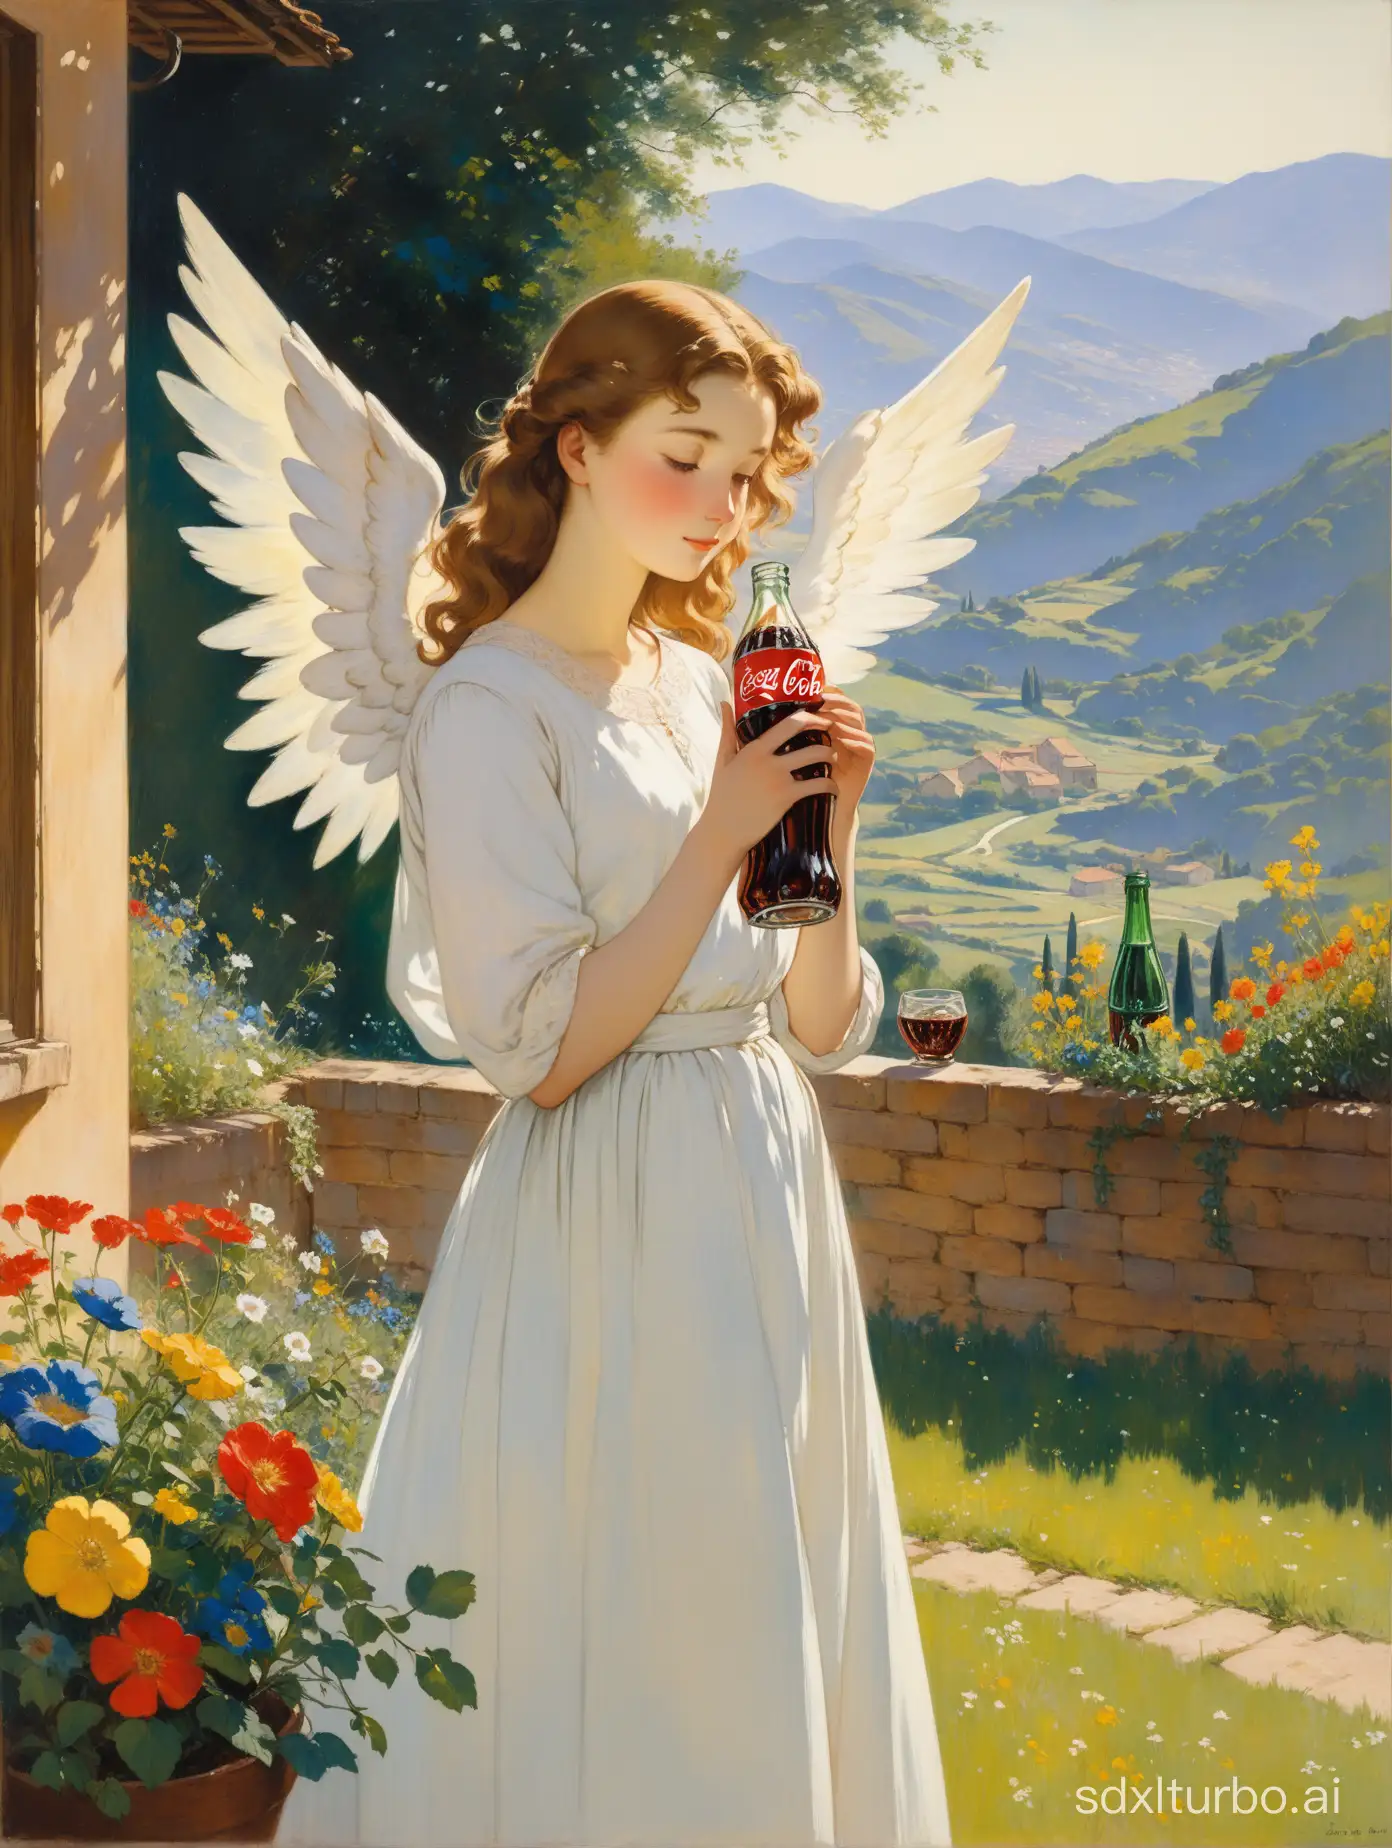 An angel with beautiful wings, majestic wings, wearing a long white dress, in the backyard of her house, drinking from a coca-cola glass bottle, Italy, 1950s, painting, impressionism, By John Everett Millais, https://www.wikiart.org/es/john-everett-millais, mountains, focus on the wings, warm colors, colors green yellow and blue on the background, flowers on the garden, natural light, sunlight, medium full shot, beautiful, painting, ethereal, Oil Paint, Golden Hour, Beautiful Lighting, Serene face